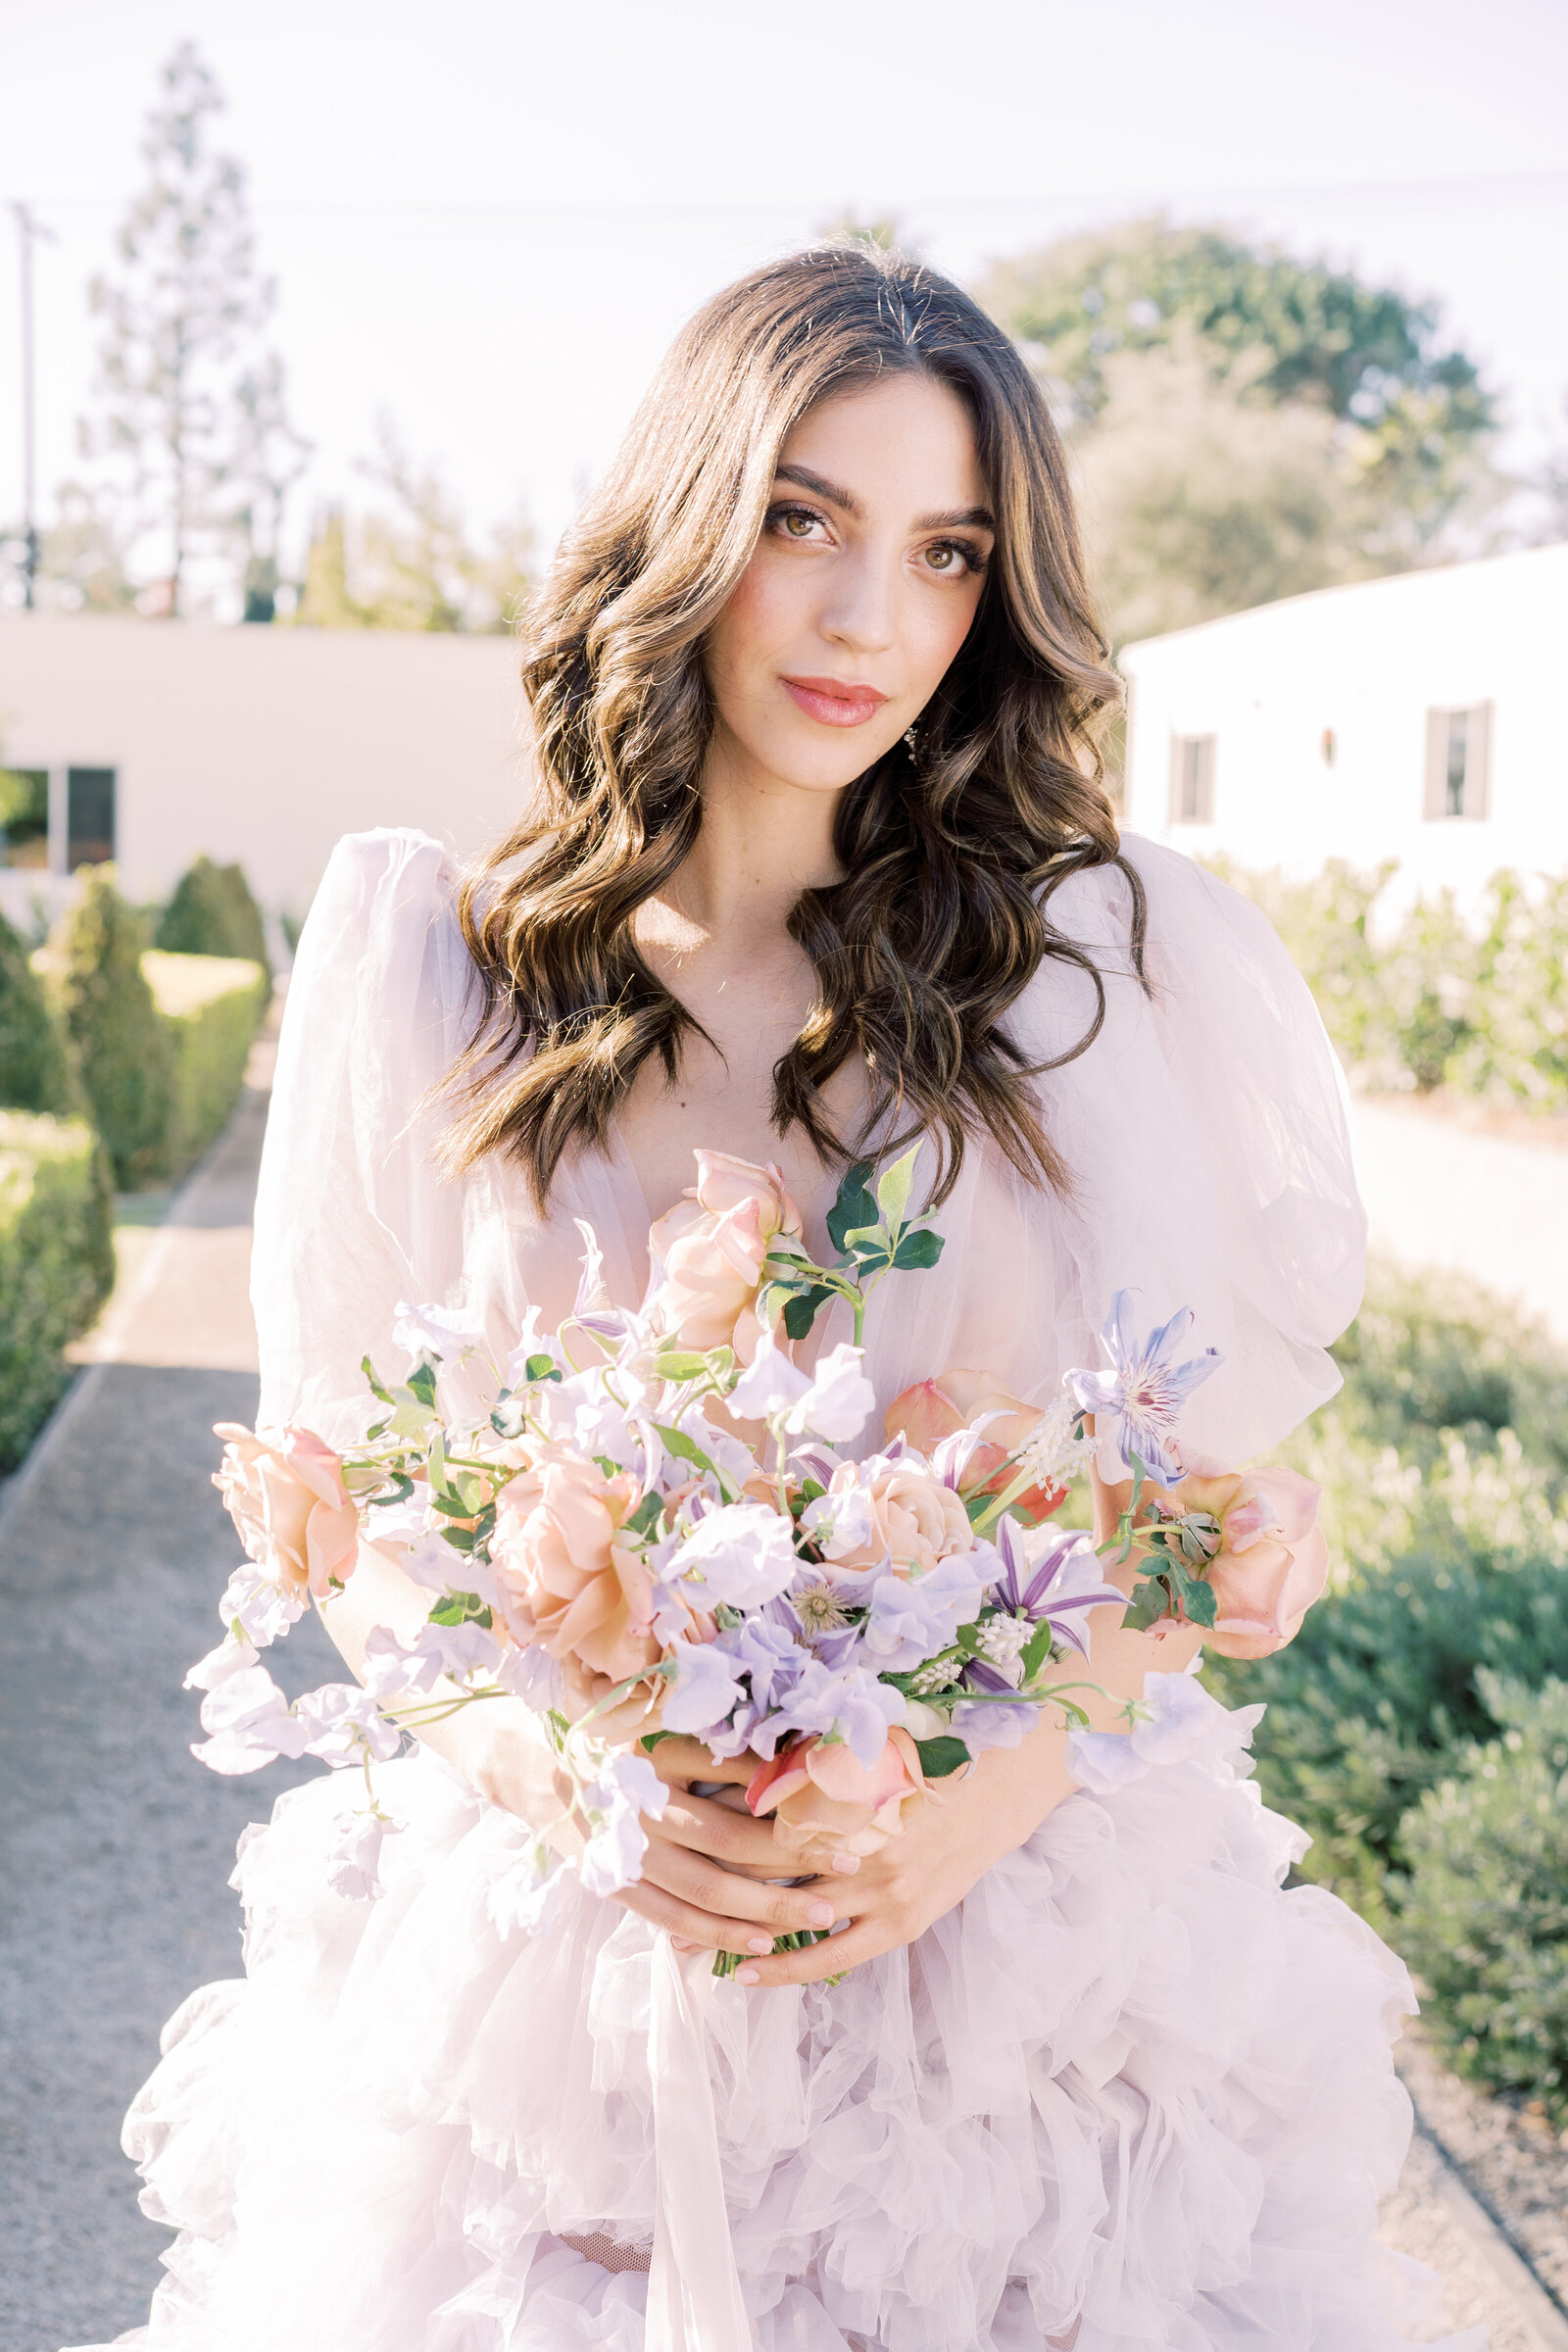 Portrait of a bride in a lavender wedding gown in a garden holding a bouquet.